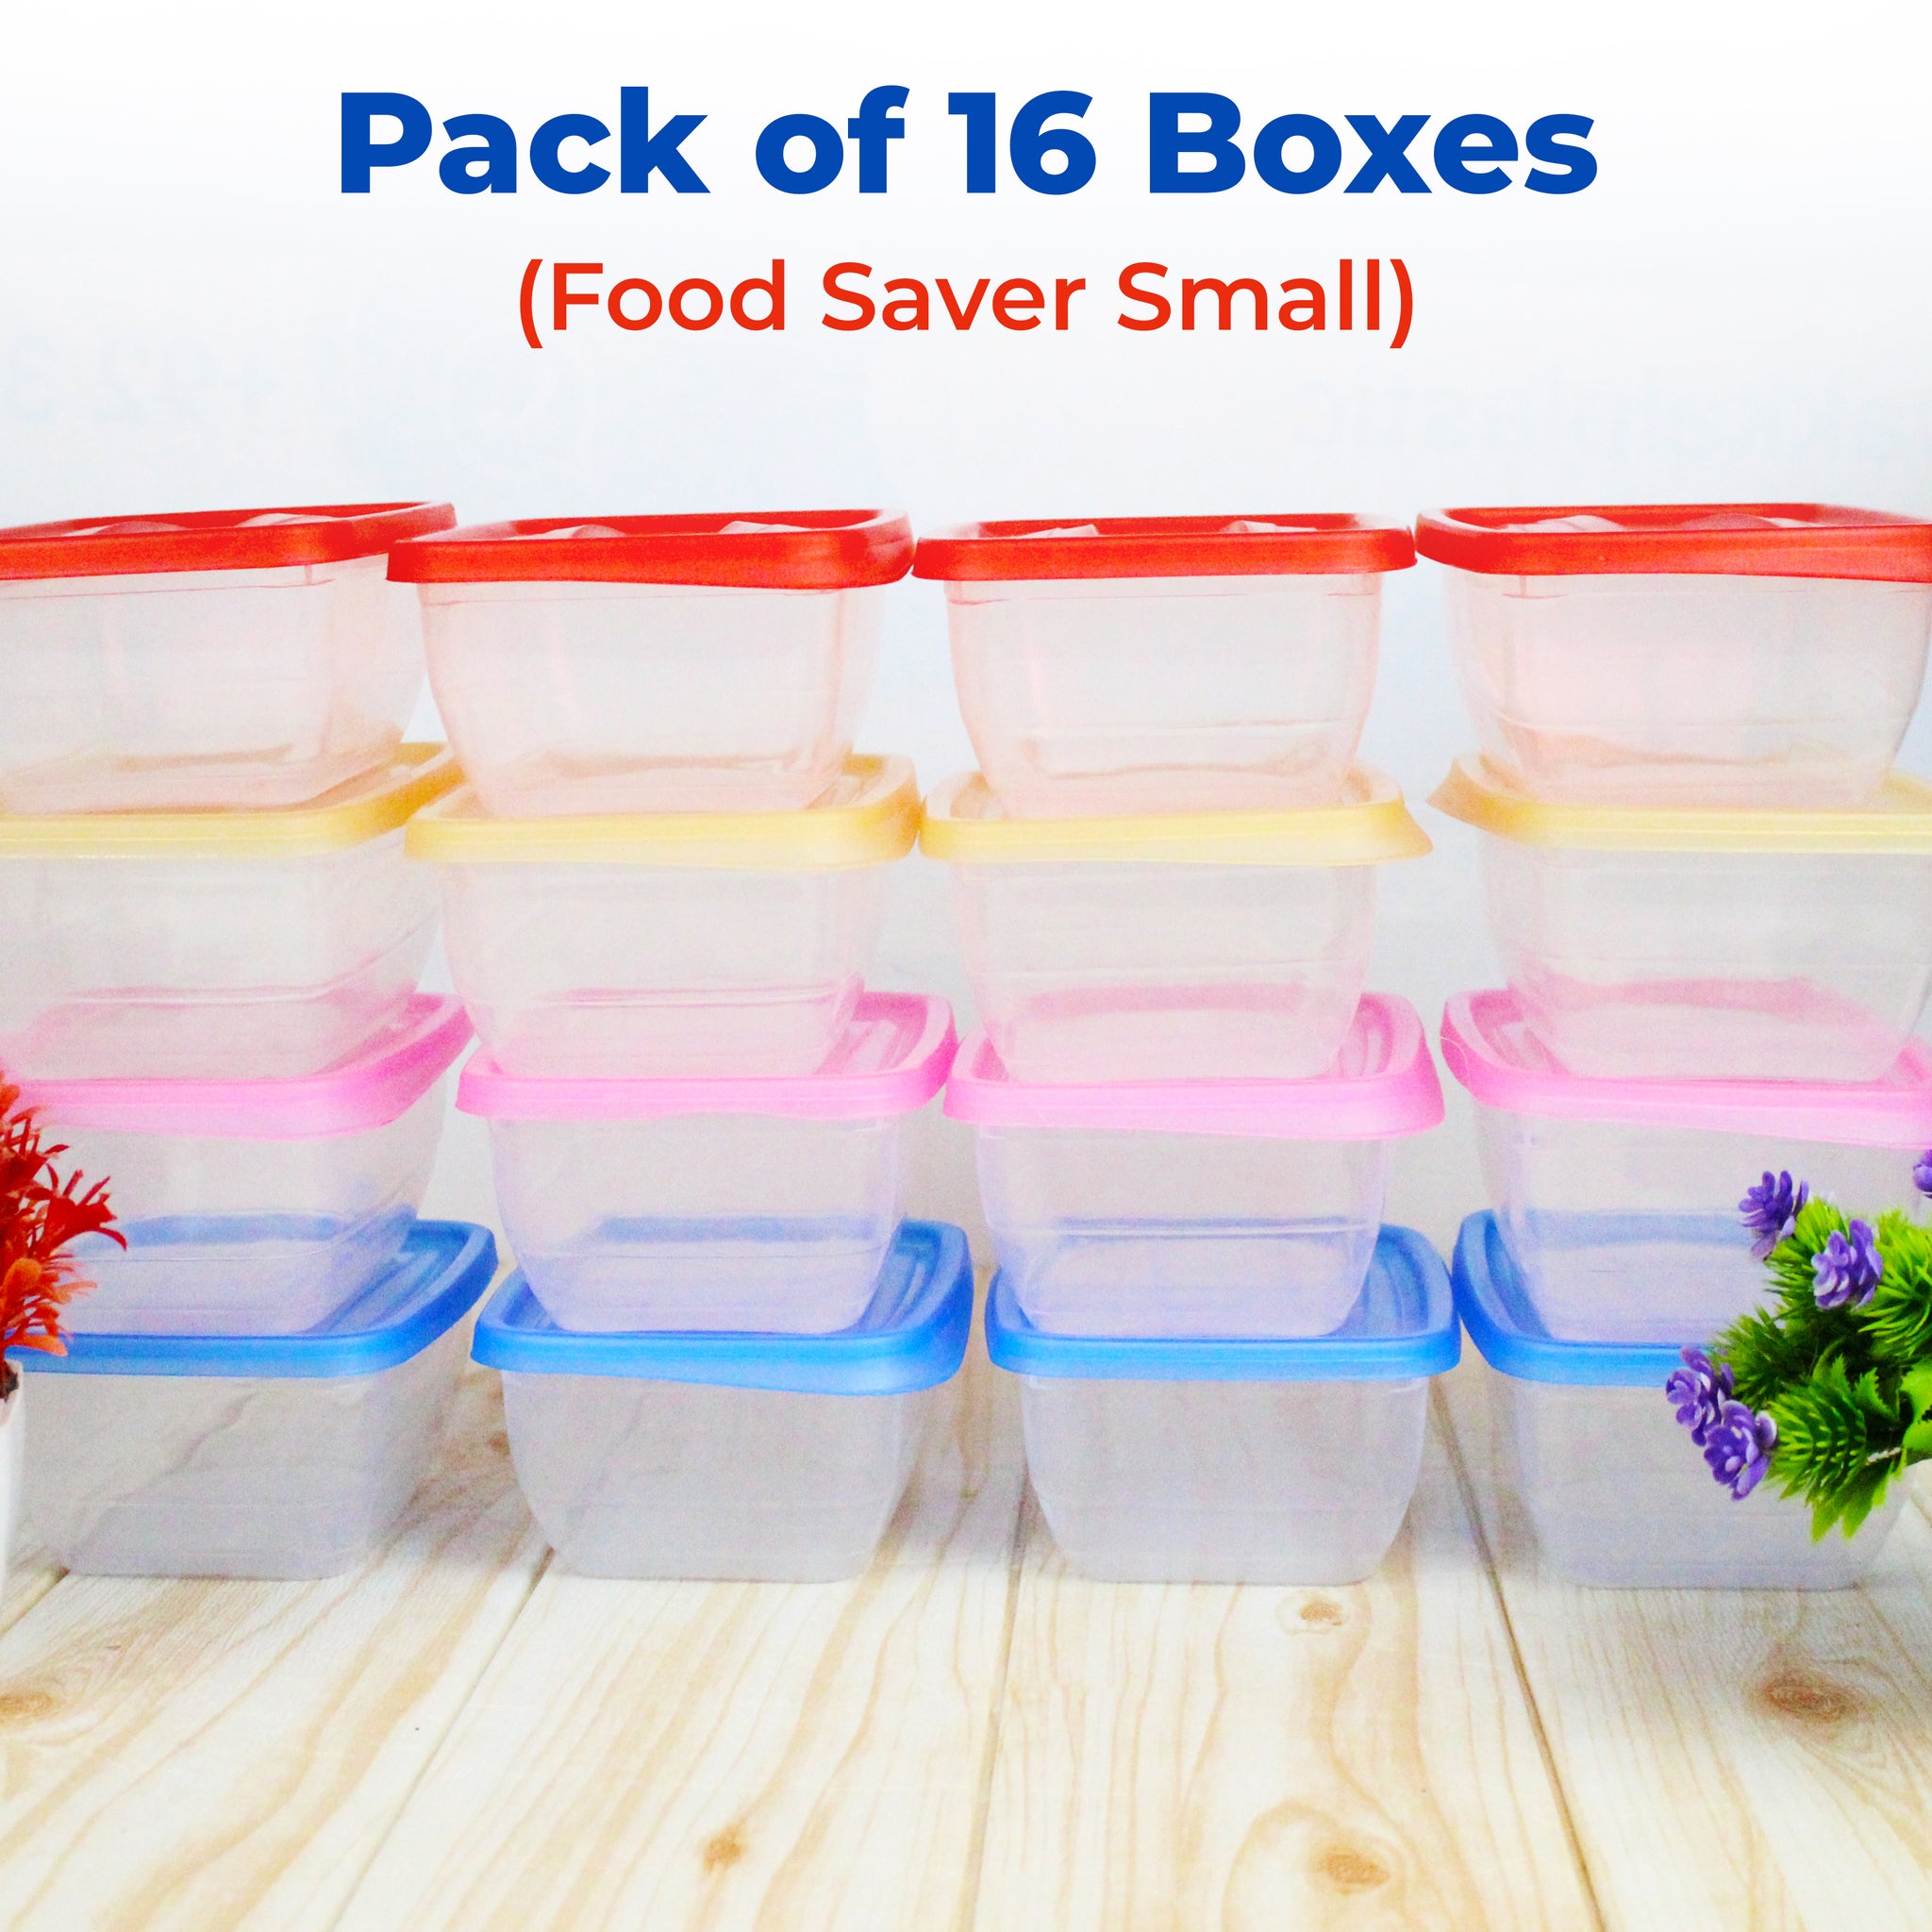 Food saver (Small) Pack of 16 Pcs